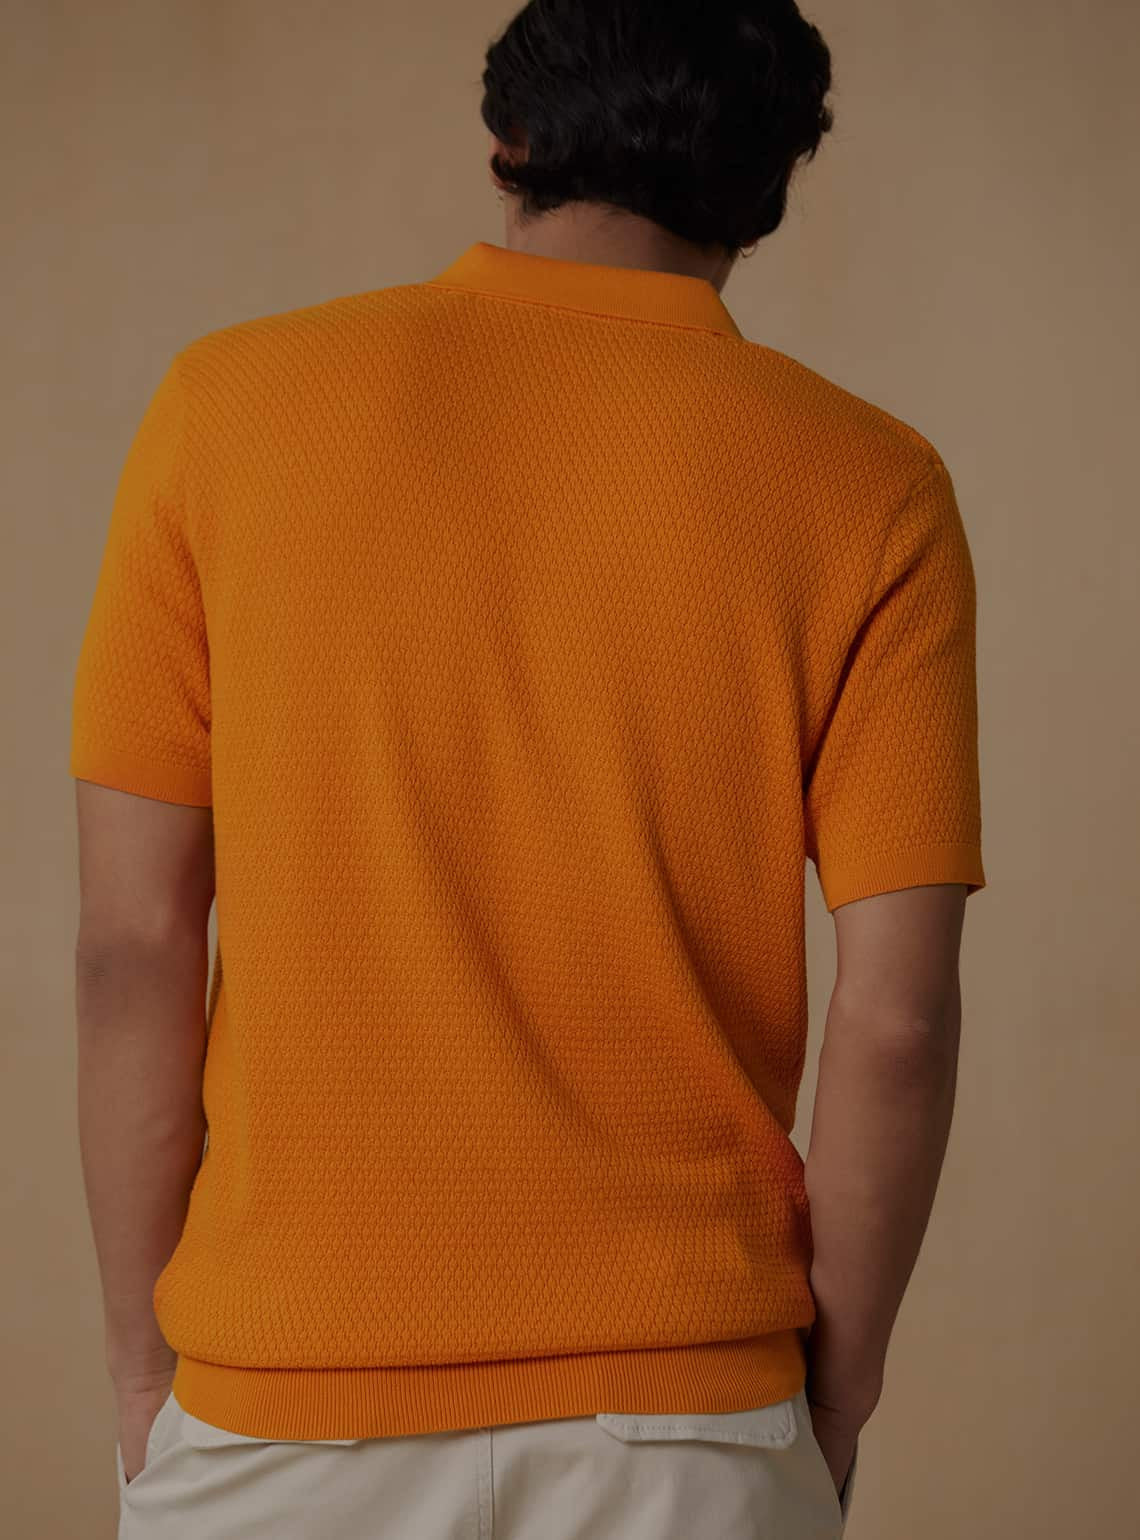 Tangerine Structured Polo